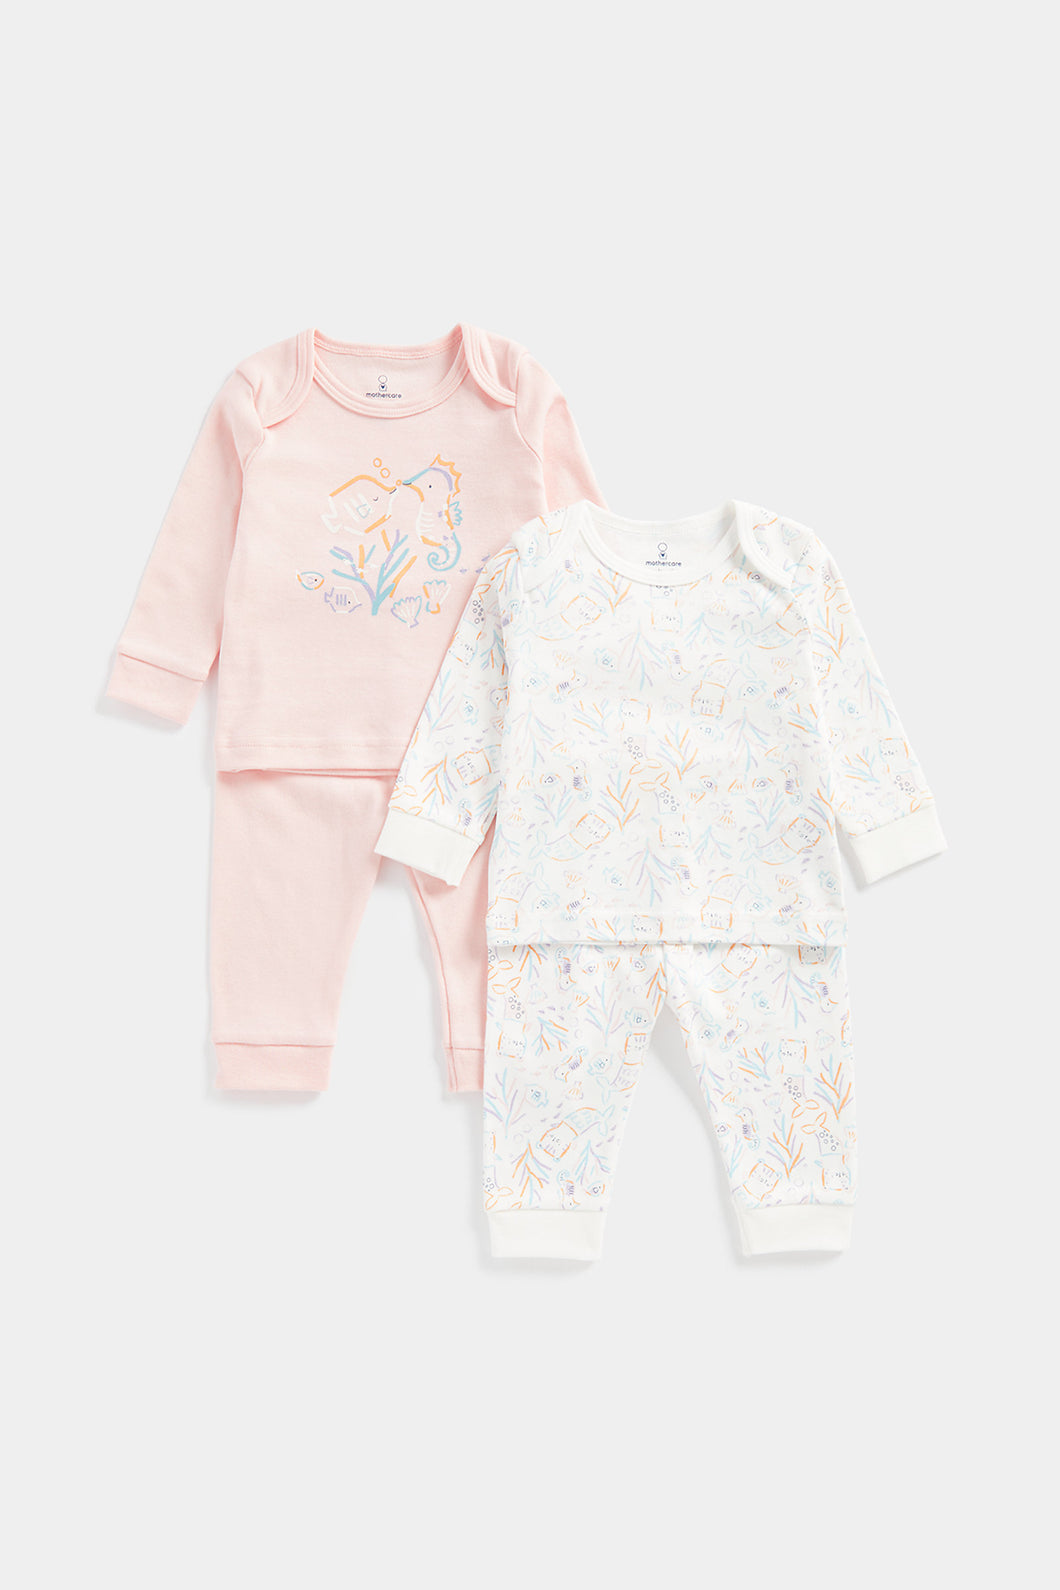 Mothercare Under-the-Sea Pyjamas - 2 Pack